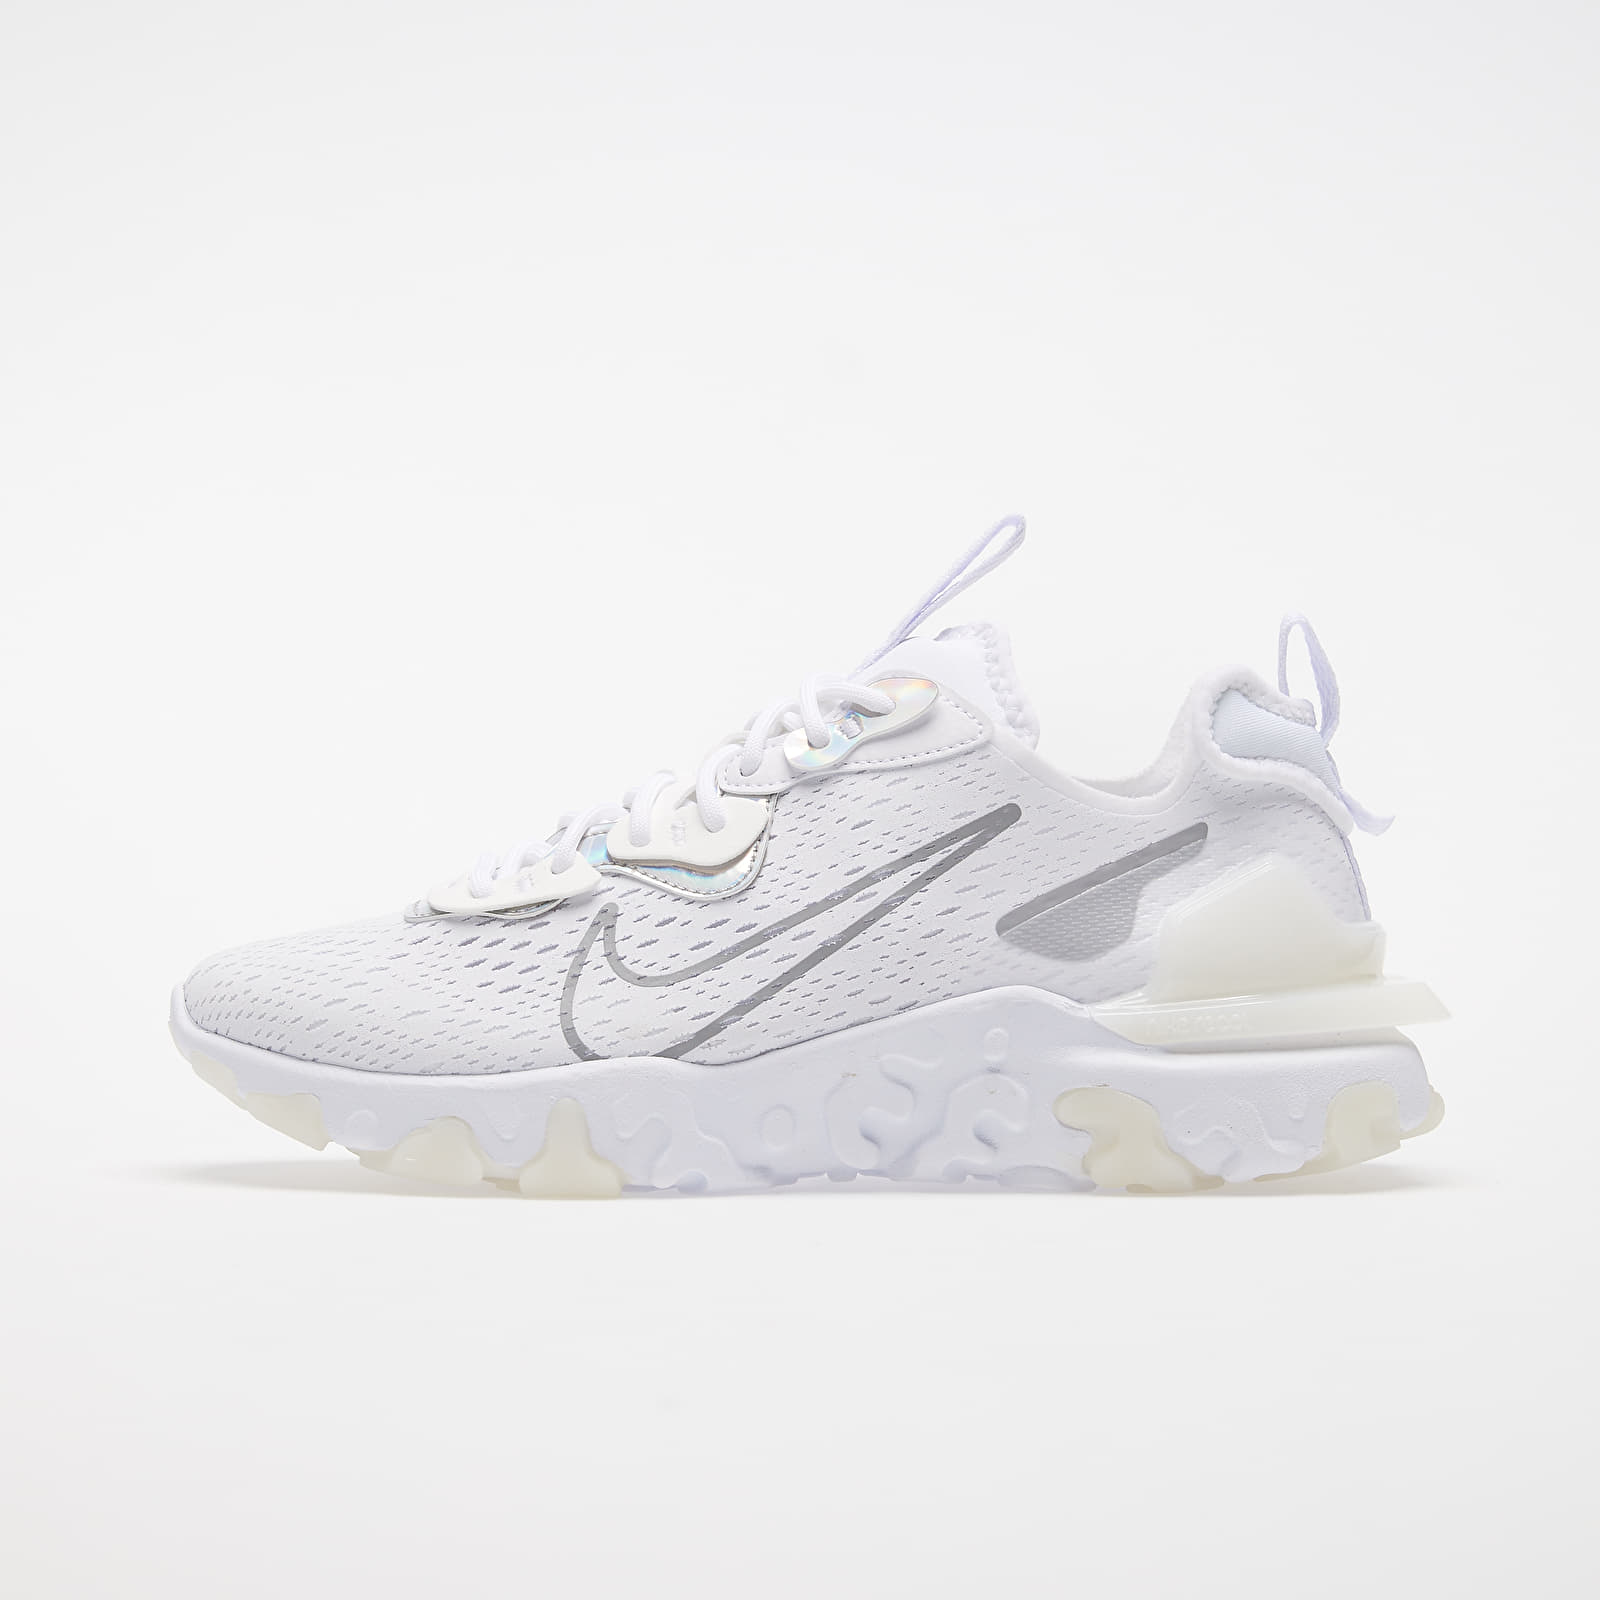 Nike W NSW React Vision Essential White/ Particle Grey-White 53239